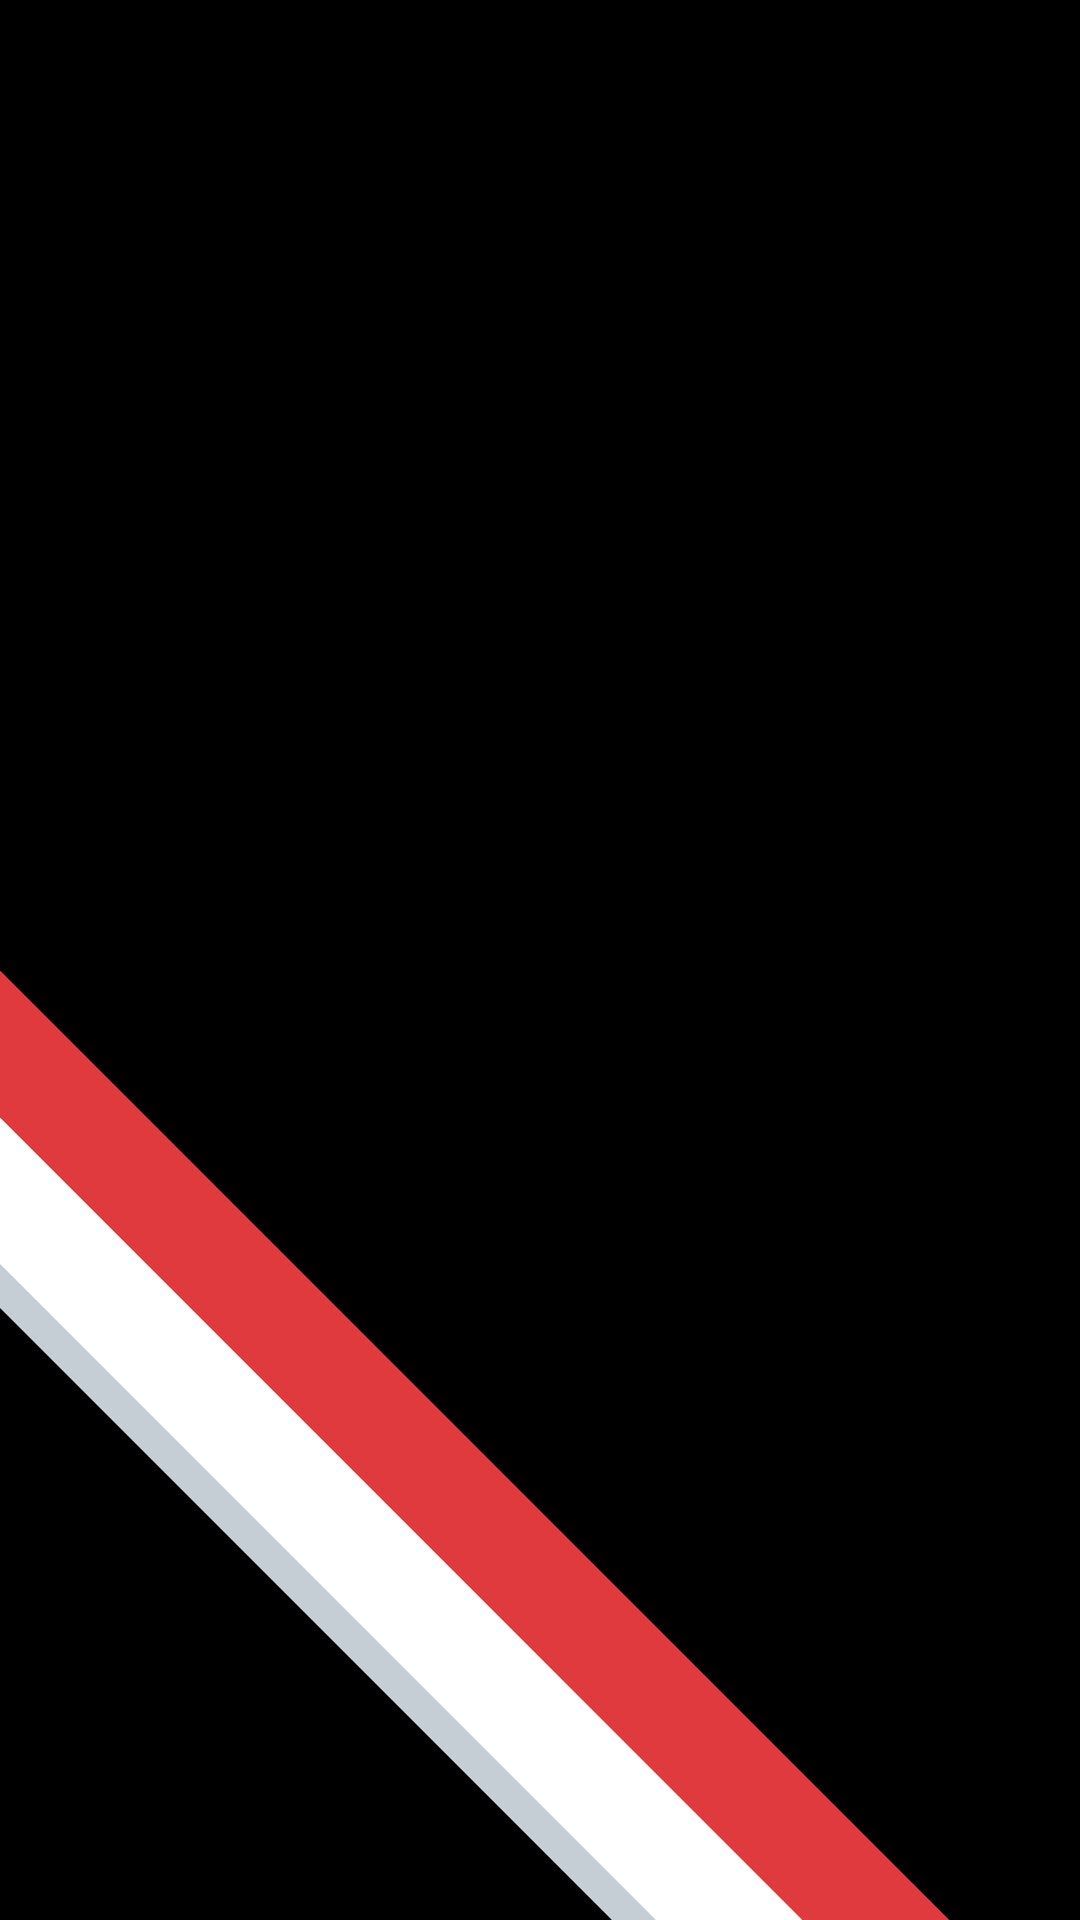 Minimalist phone wallpaper I created. Thought some of you might like it.: ripcity